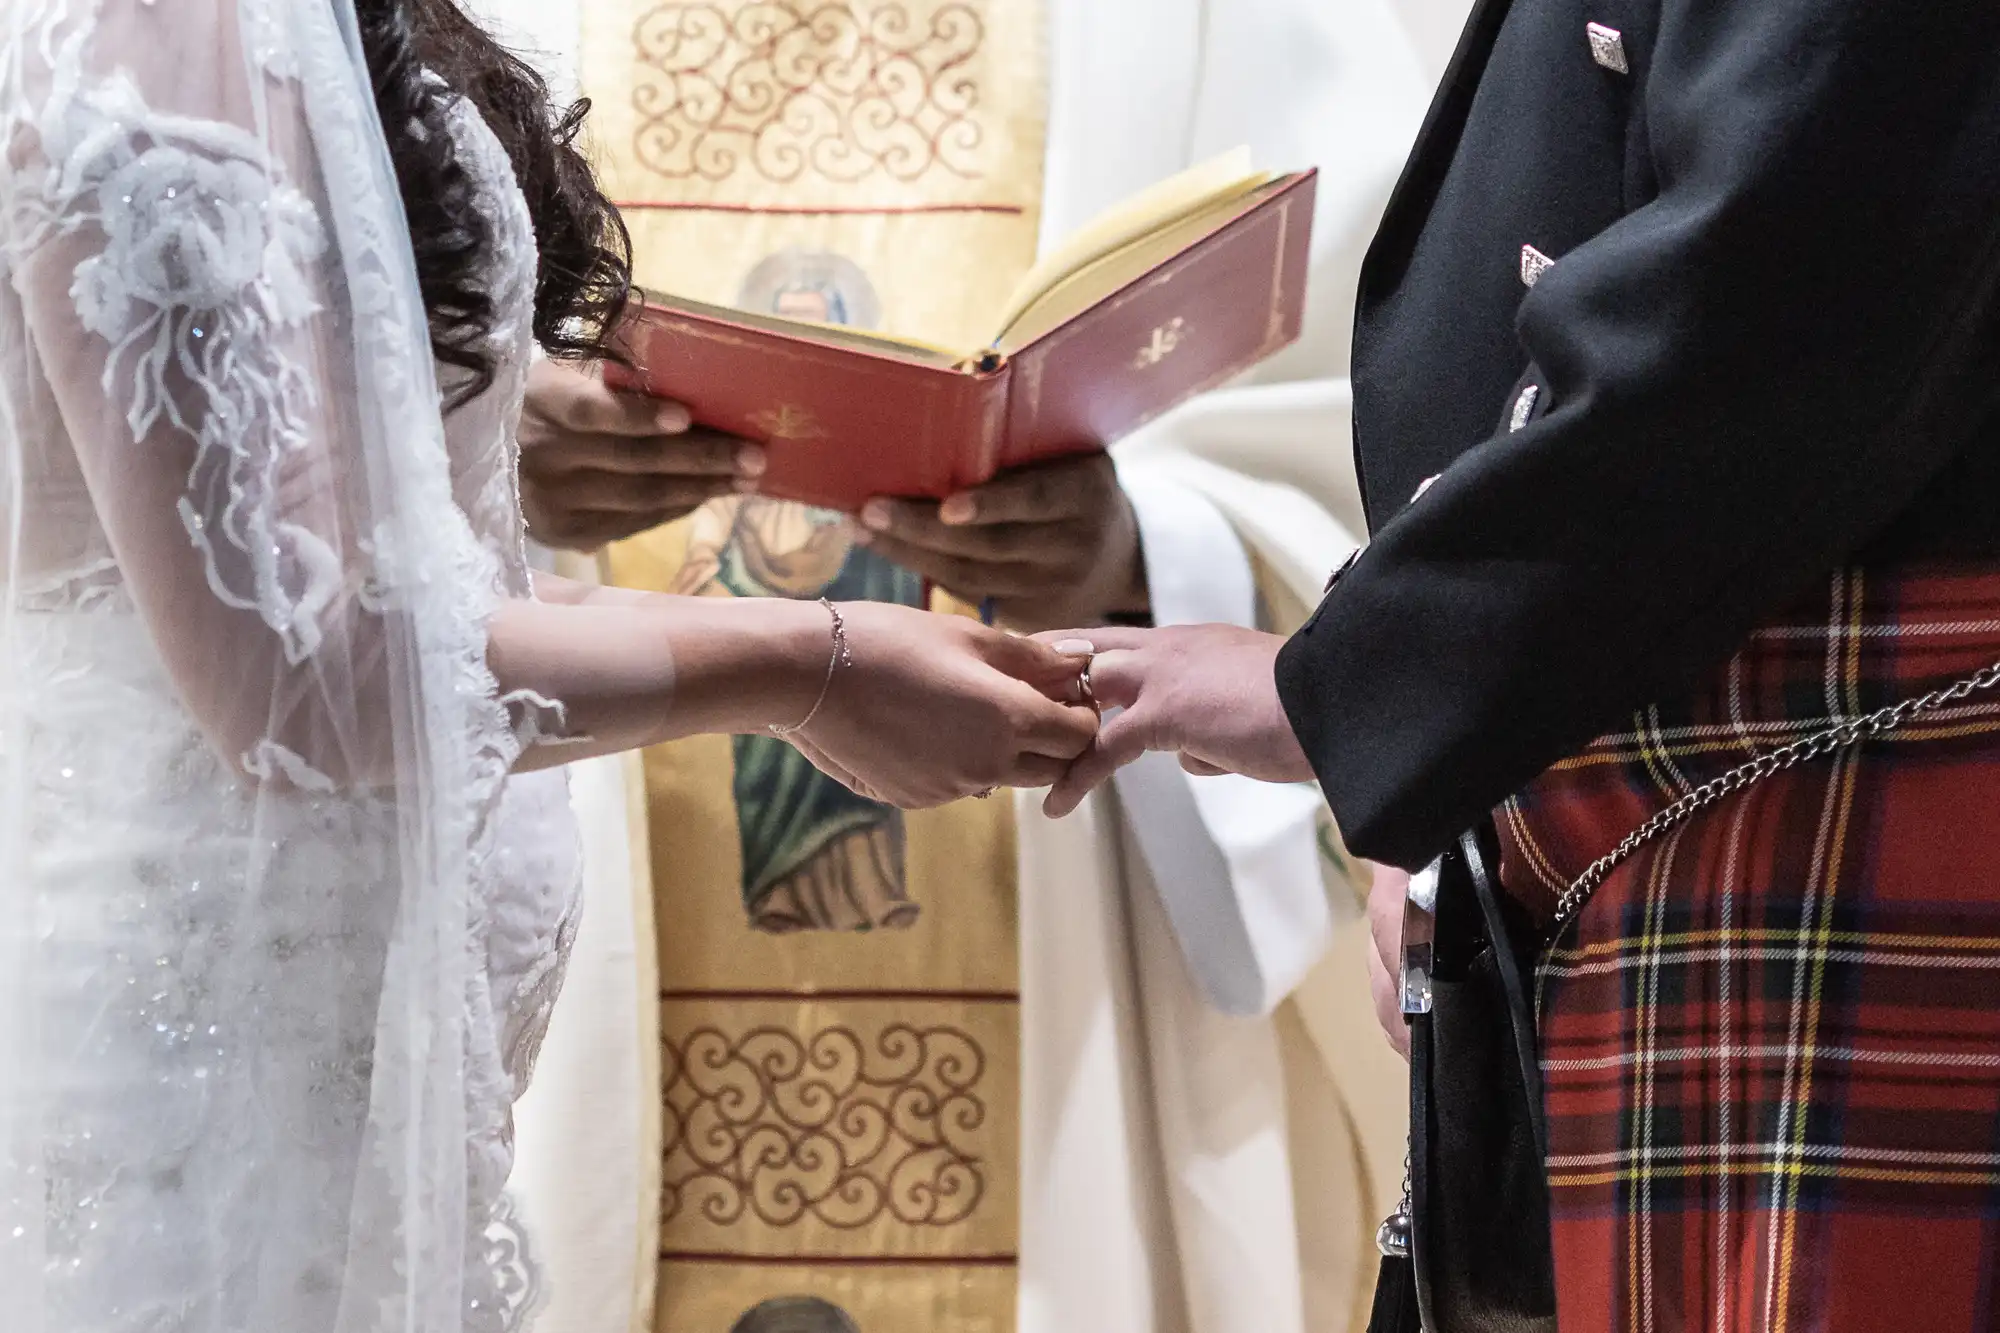 A bride in a white dress and a groom in a kilt exchanging rings during a wedding ceremony, with a clergy member holding a red book.